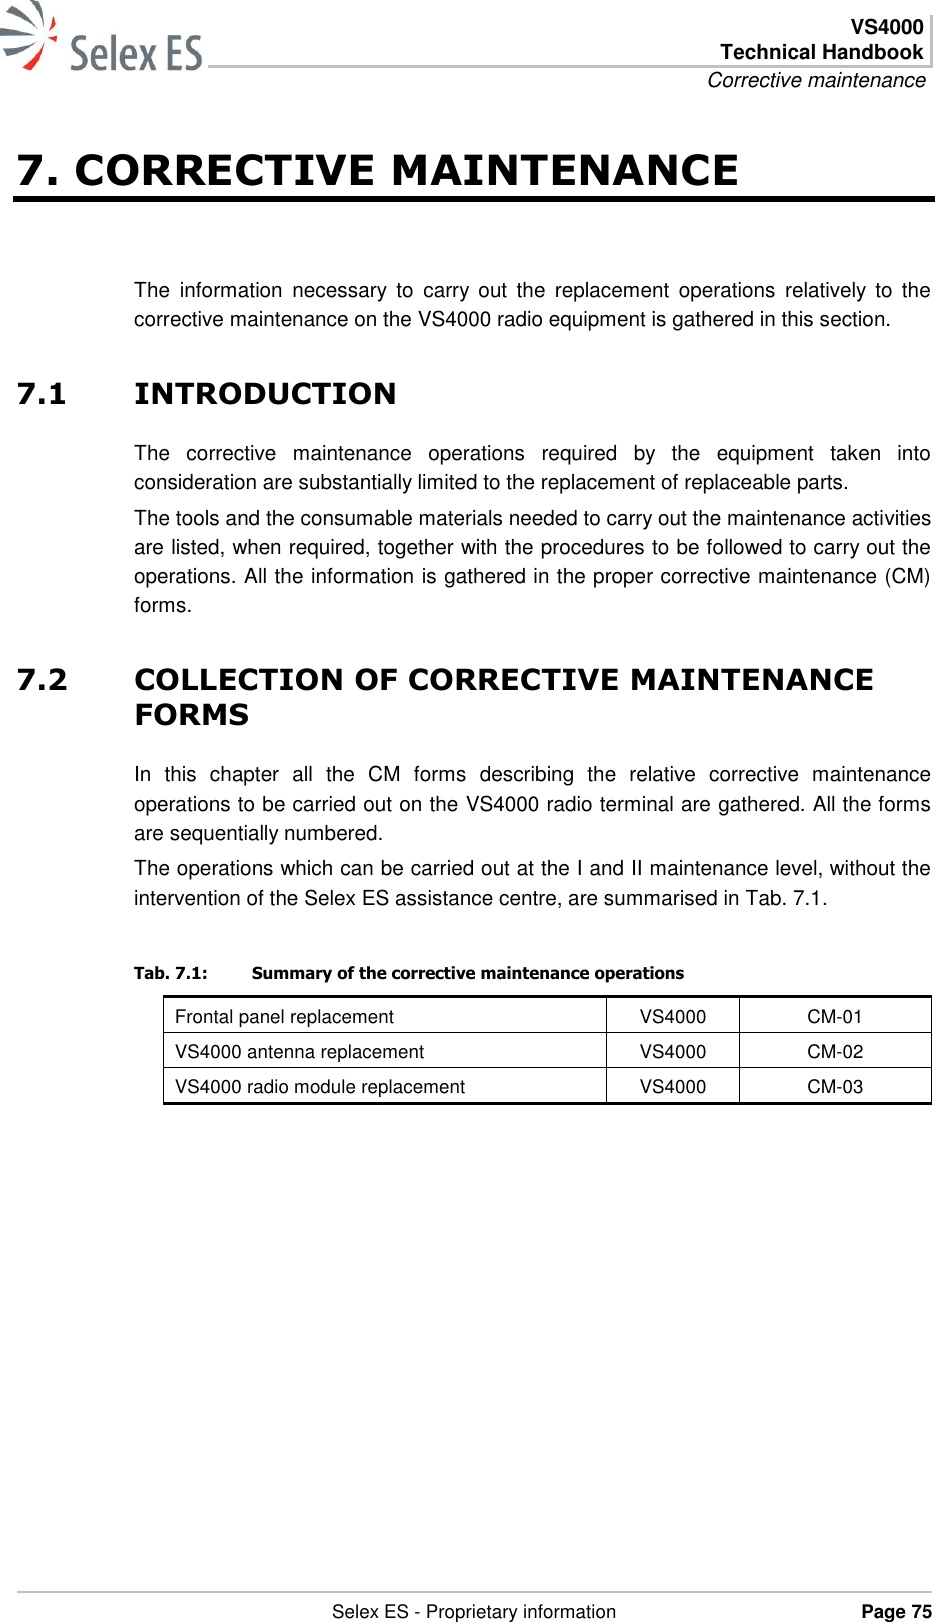  VS4000 Technical Handbook Corrective maintenance   Selex ES - Proprietary information Page 75  7. CORRECTIVE MAINTENANCE The  information  necessary  to  carry  out  the  replacement  operations  relatively  to  the corrective maintenance on the VS4000 radio equipment is gathered in this section. 7.1 INTRODUCTION The  corrective  maintenance  operations  required  by  the  equipment  taken  into consideration are substantially limited to the replacement of replaceable parts. The tools and the consumable materials needed to carry out the maintenance activities are listed, when required, together with the procedures to be followed to carry out the operations. All the information is gathered in the proper corrective maintenance (CM) forms. 7.2 COLLECTION OF CORRECTIVE MAINTENANCE FORMS In  this  chapter  all  the  CM  forms  describing  the  relative  corrective  maintenance operations to be carried out on the VS4000 radio terminal are gathered. All the forms are sequentially numbered. The operations which can be carried out at the I and II maintenance level, without the intervention of the Selex ES assistance centre, are summarised in Tab. 7.1. Tab. 7.1:  Summary of the corrective maintenance operations Frontal panel replacement VS4000 CM-01 VS4000 antenna replacement VS4000 CM-02 VS4000 radio module replacement VS4000 CM-03  